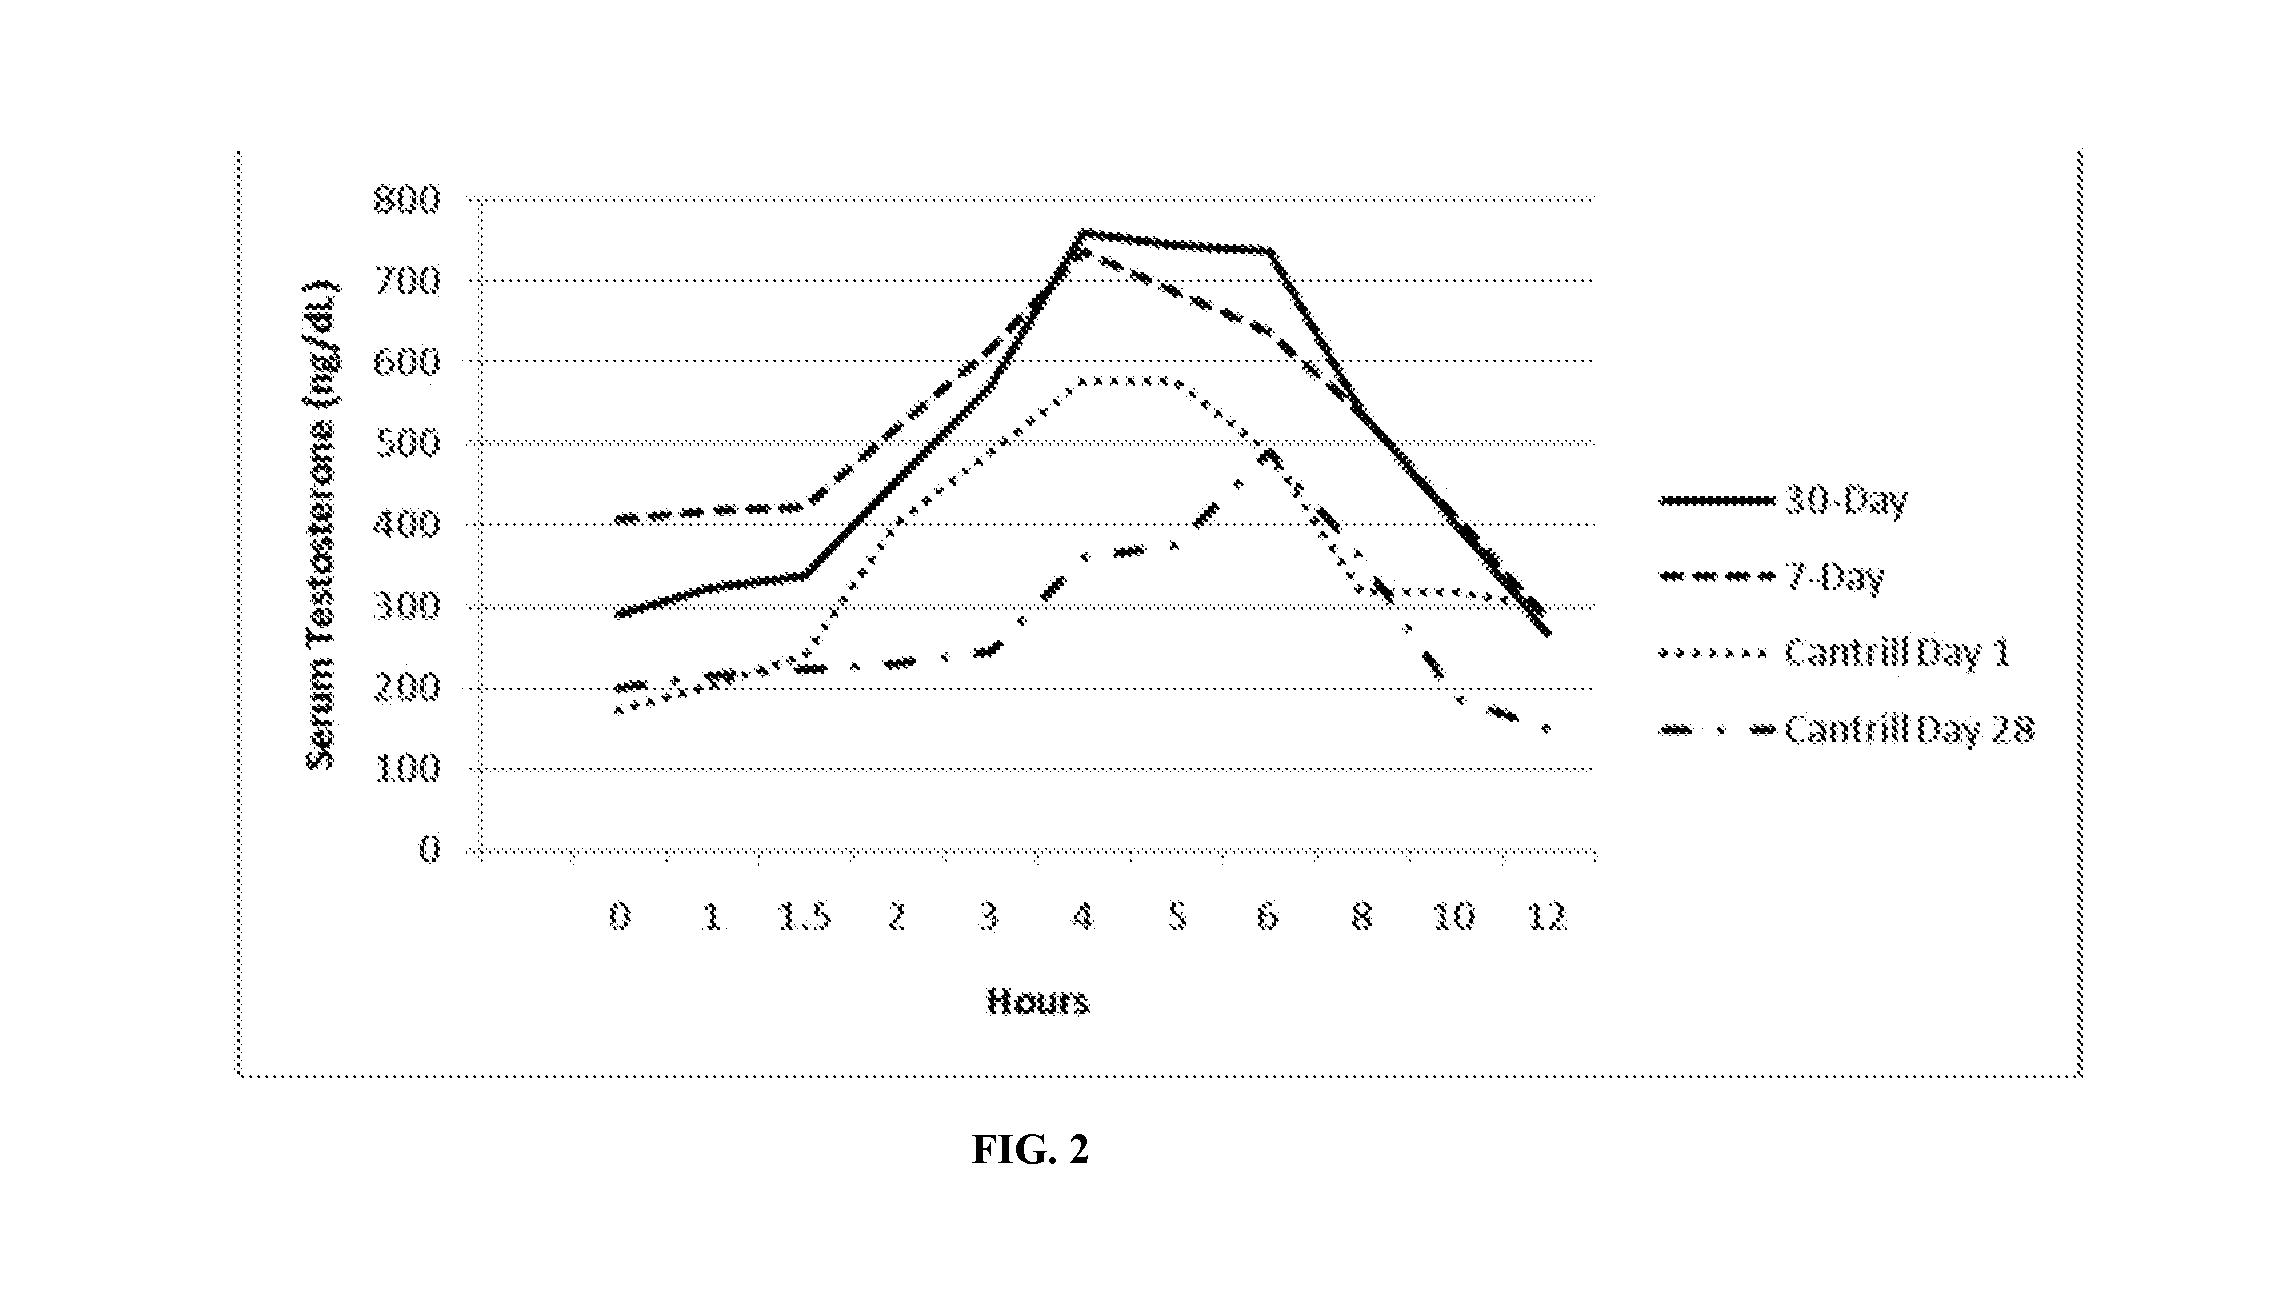 Oral pharmaceutical products and methods of use combining testosterone esters with hypolipidemic agents